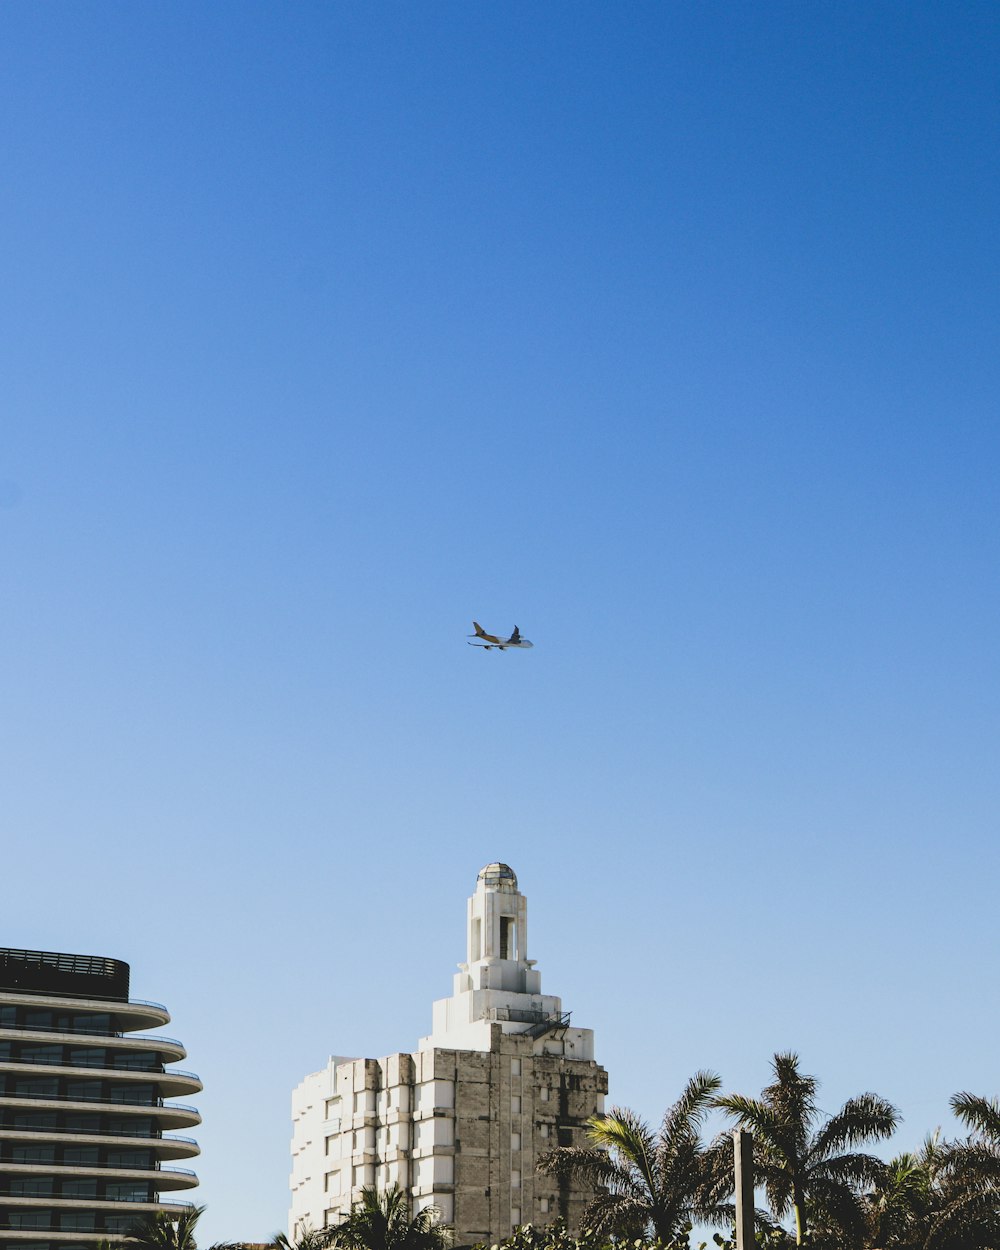 airplane flying over city buildings during daytime